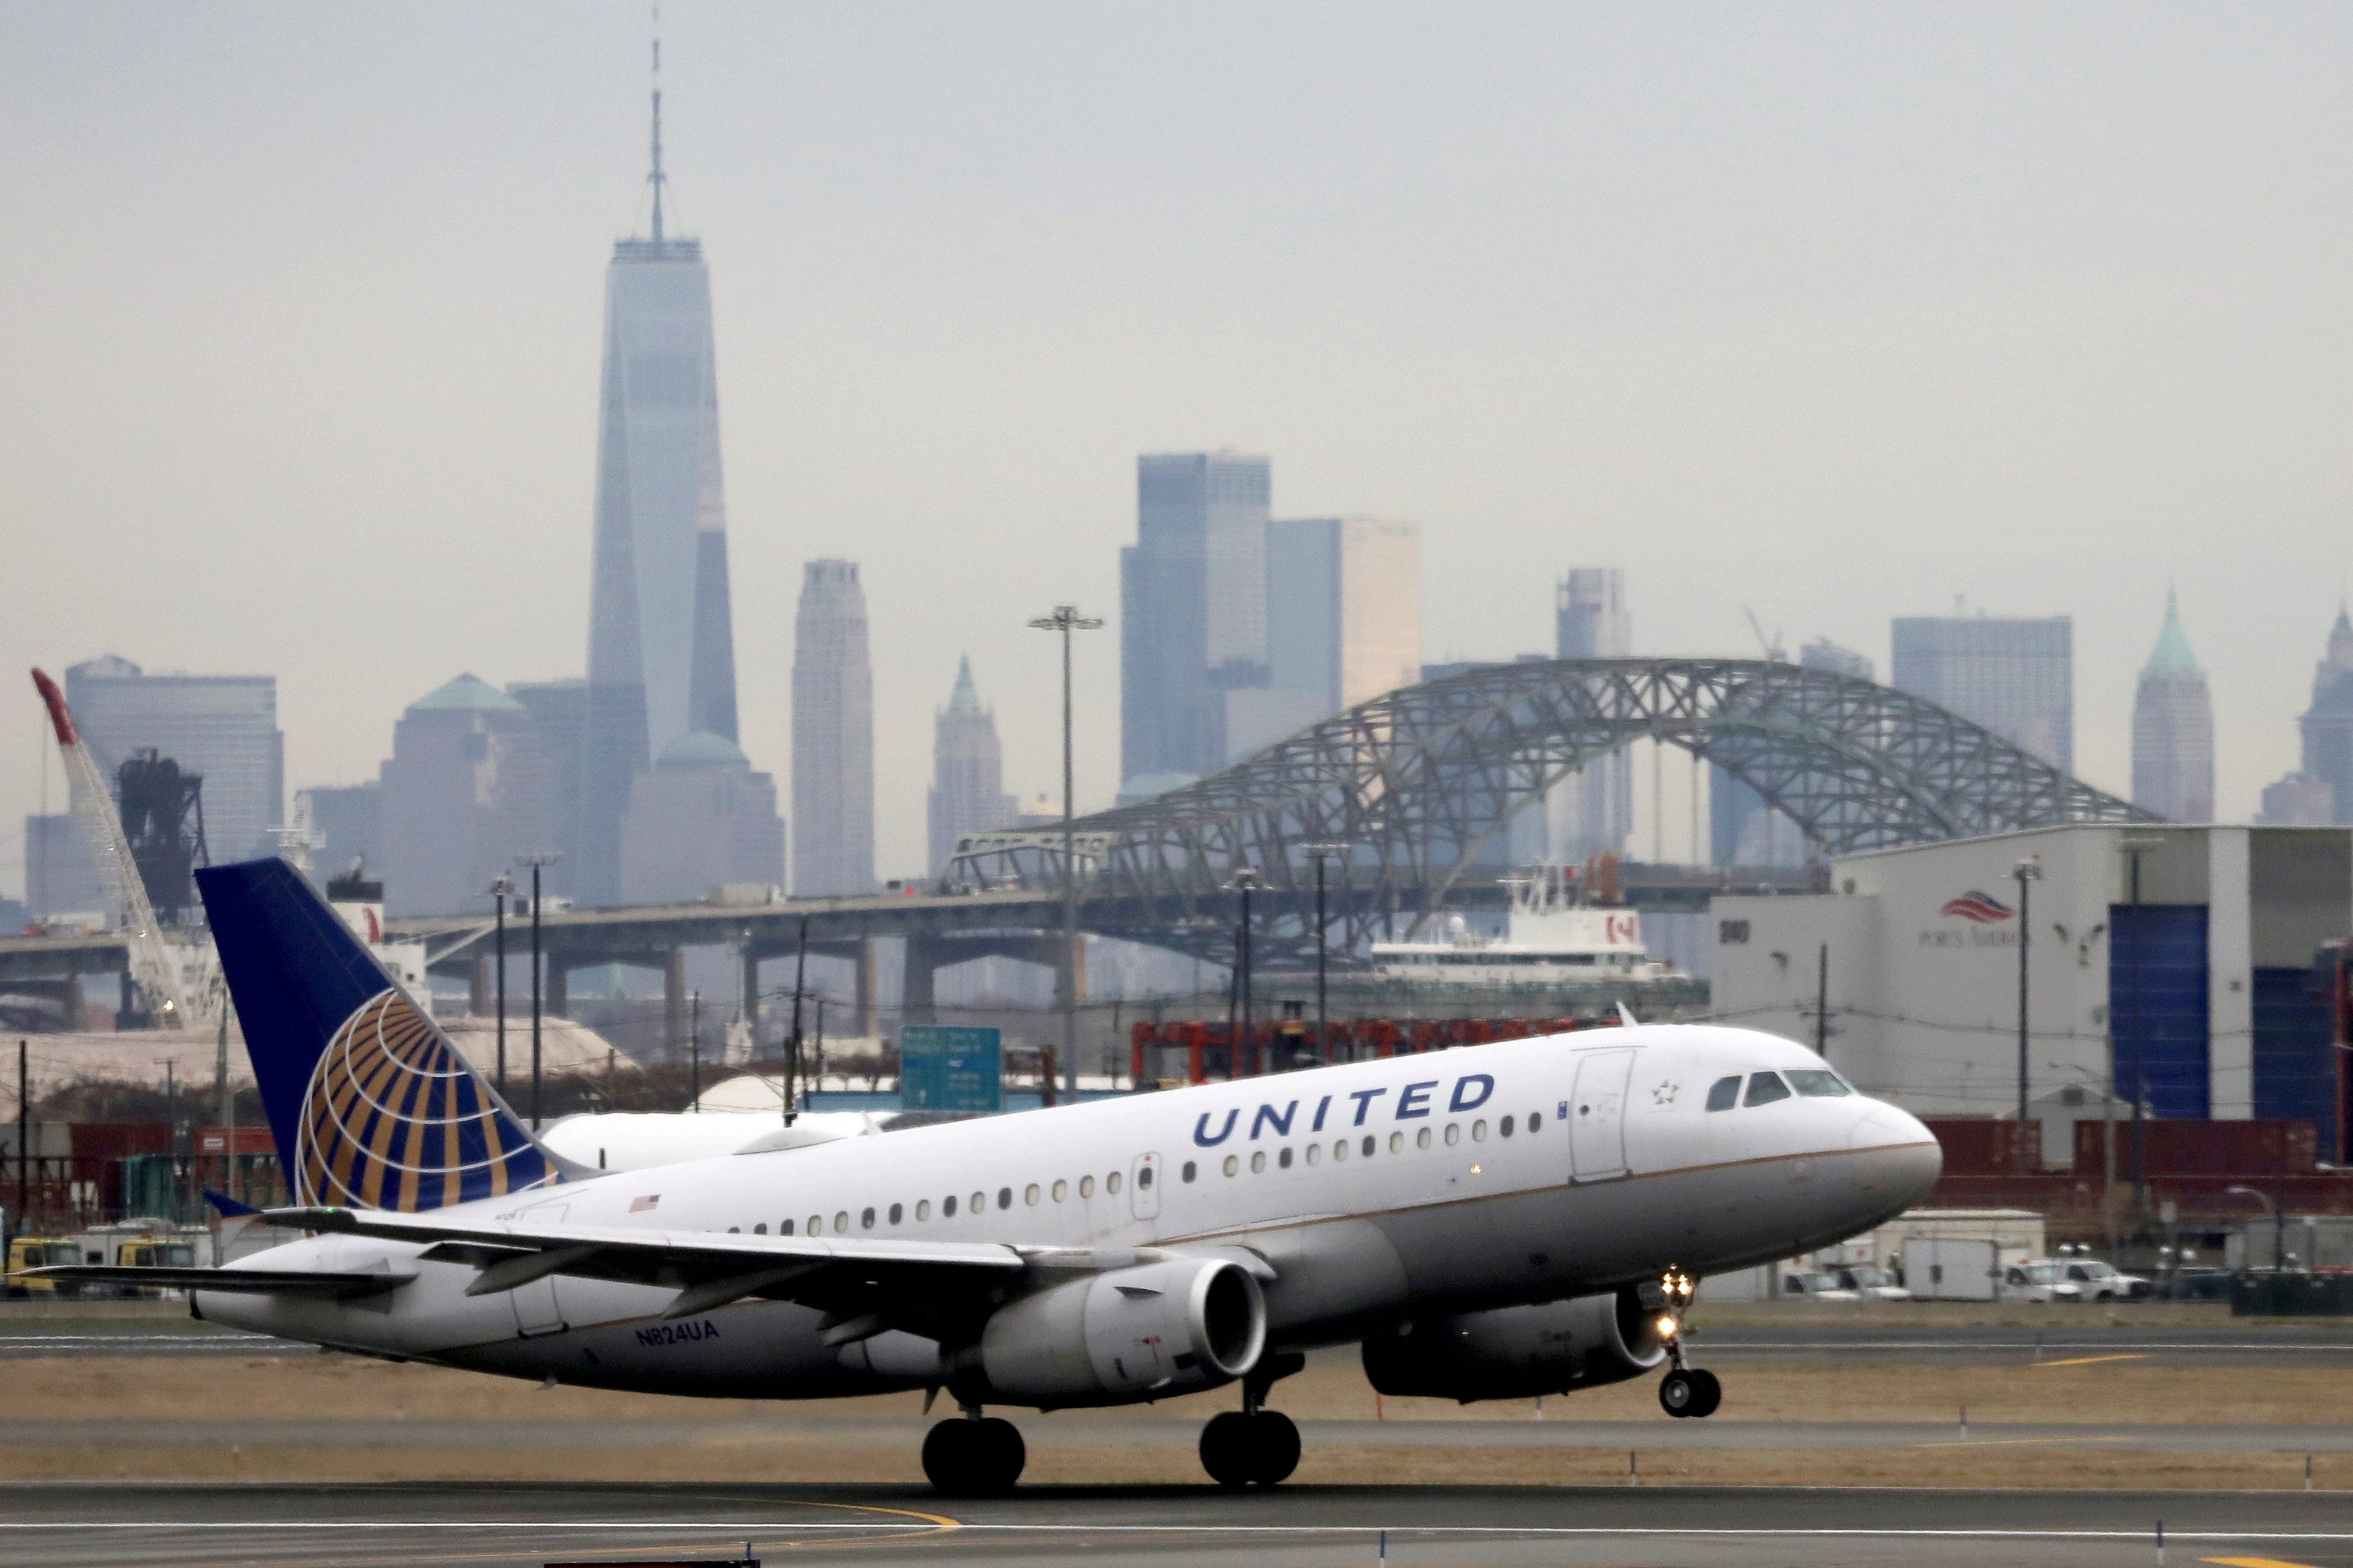 A United Airlines passenger jet takes off with New York City as a backdrop, at Newark Liberty International Airport, New Jersey, U.S. December 6, 2019. REUTERS/Chris Helgren